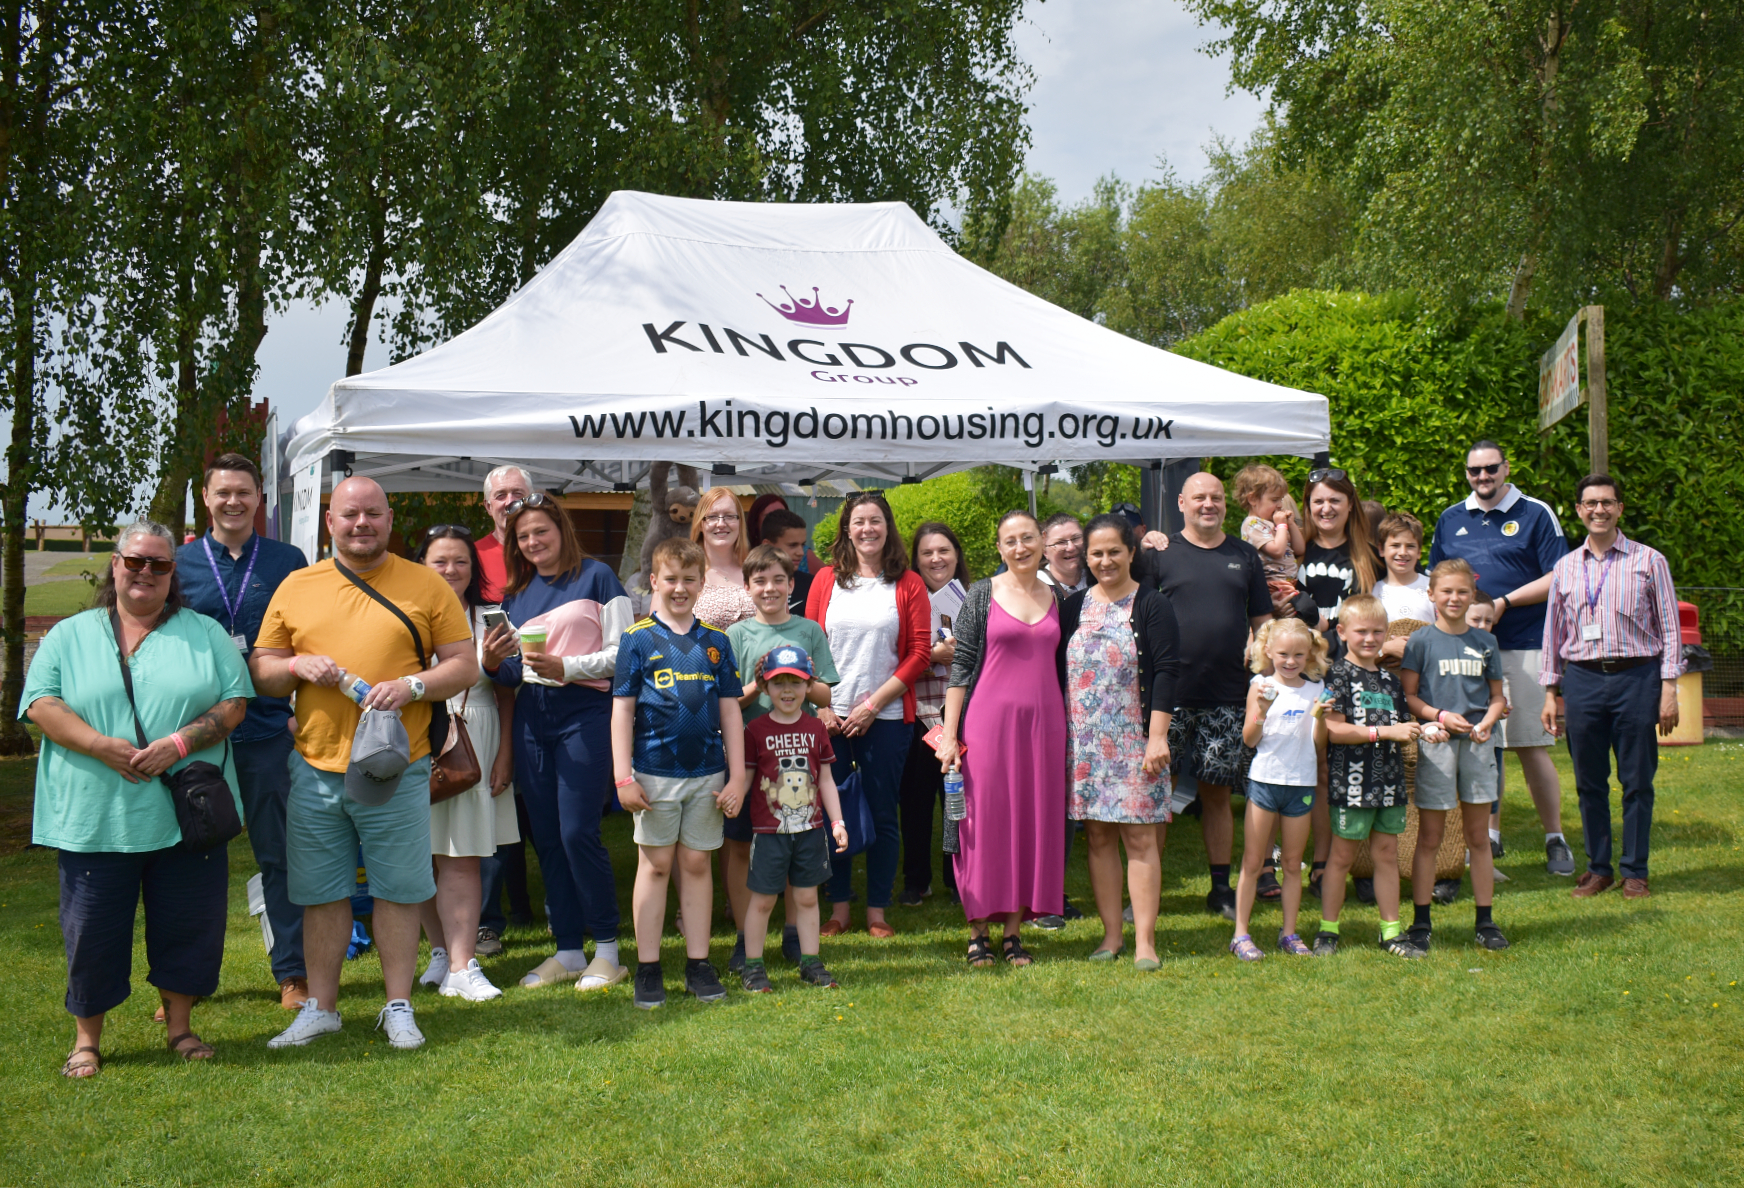 Kingdom hails adventurous day out in Perthshire at Summer Gathering